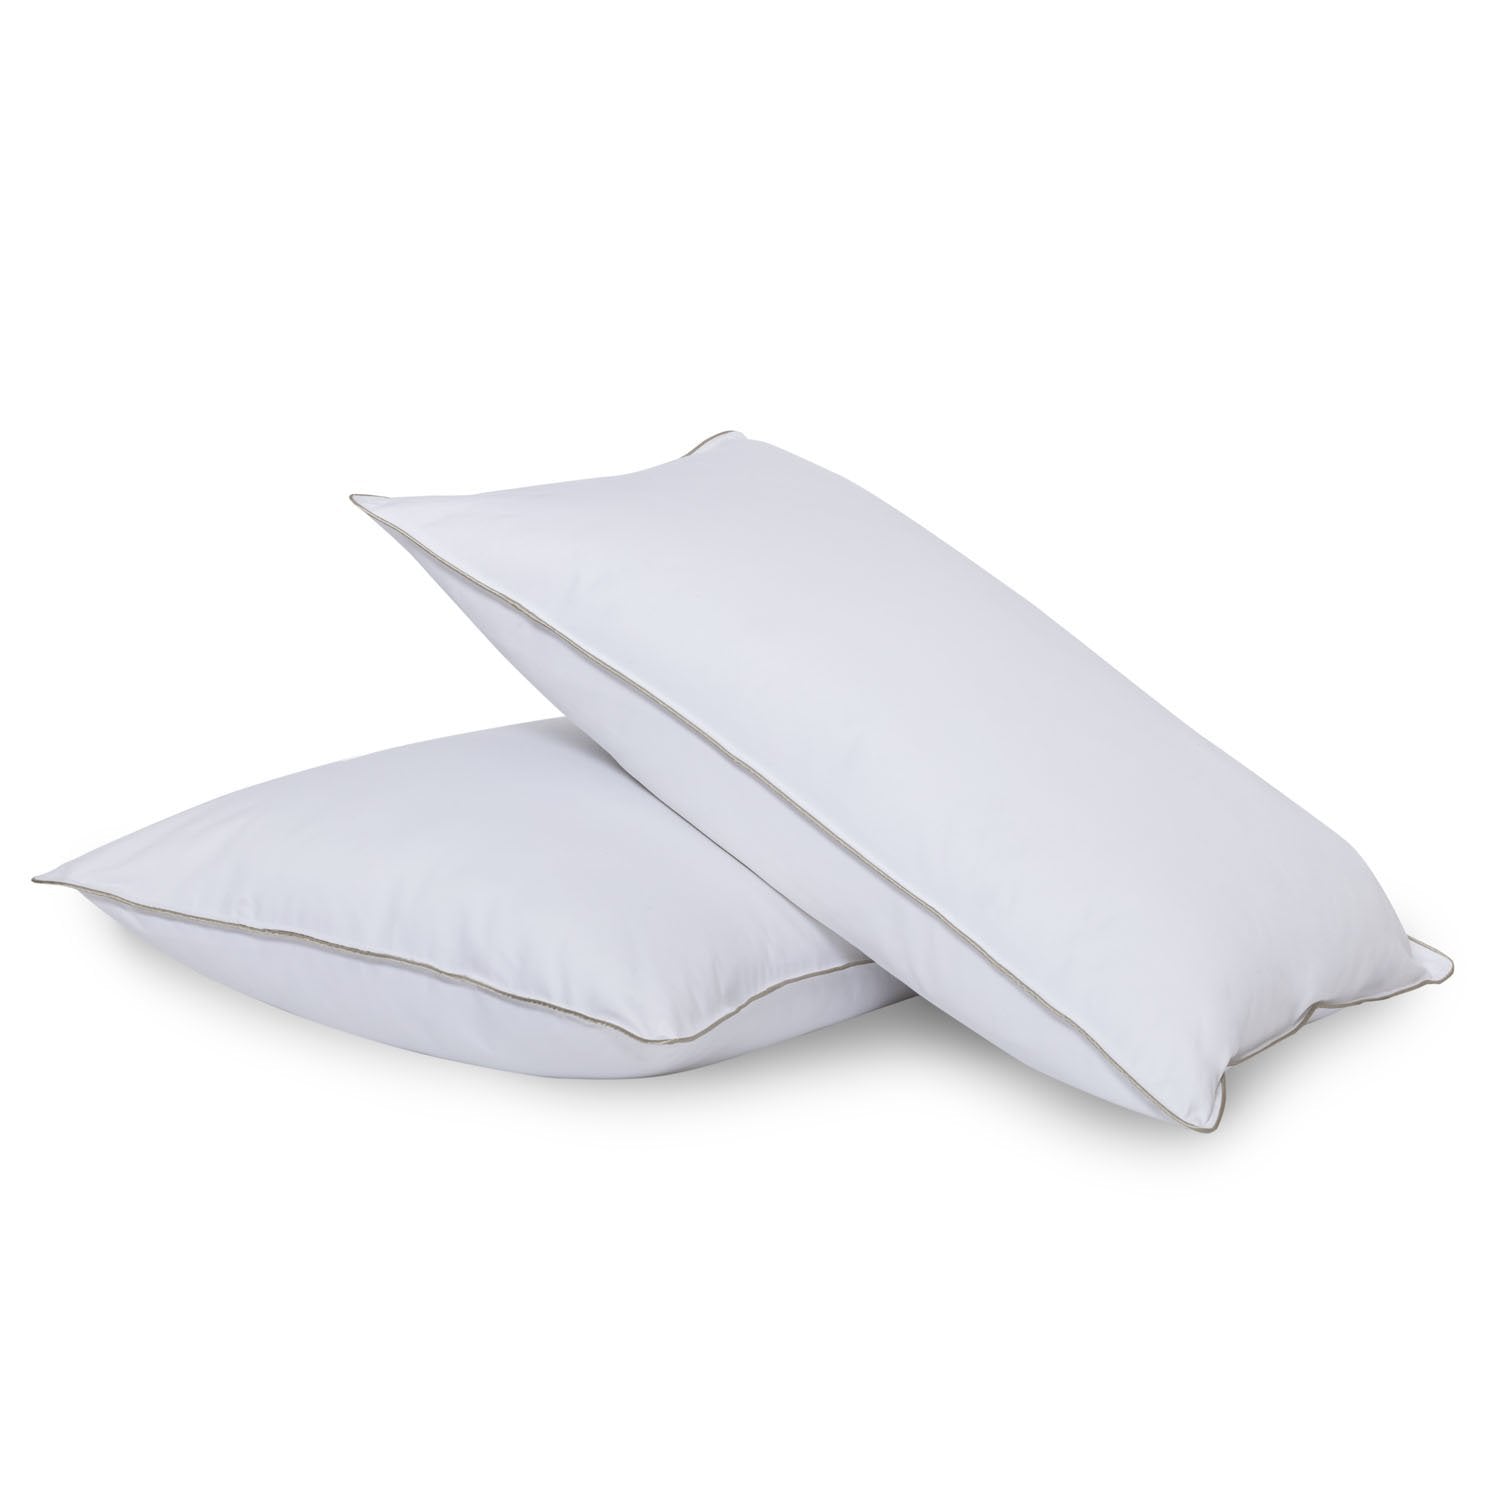 Bed Pillows for Sleeping - Standard Size Pillows, Down Alternative Extra Support Inner Pillow, Perfect for Side, Stomach & Back Support Sleeper Pillow